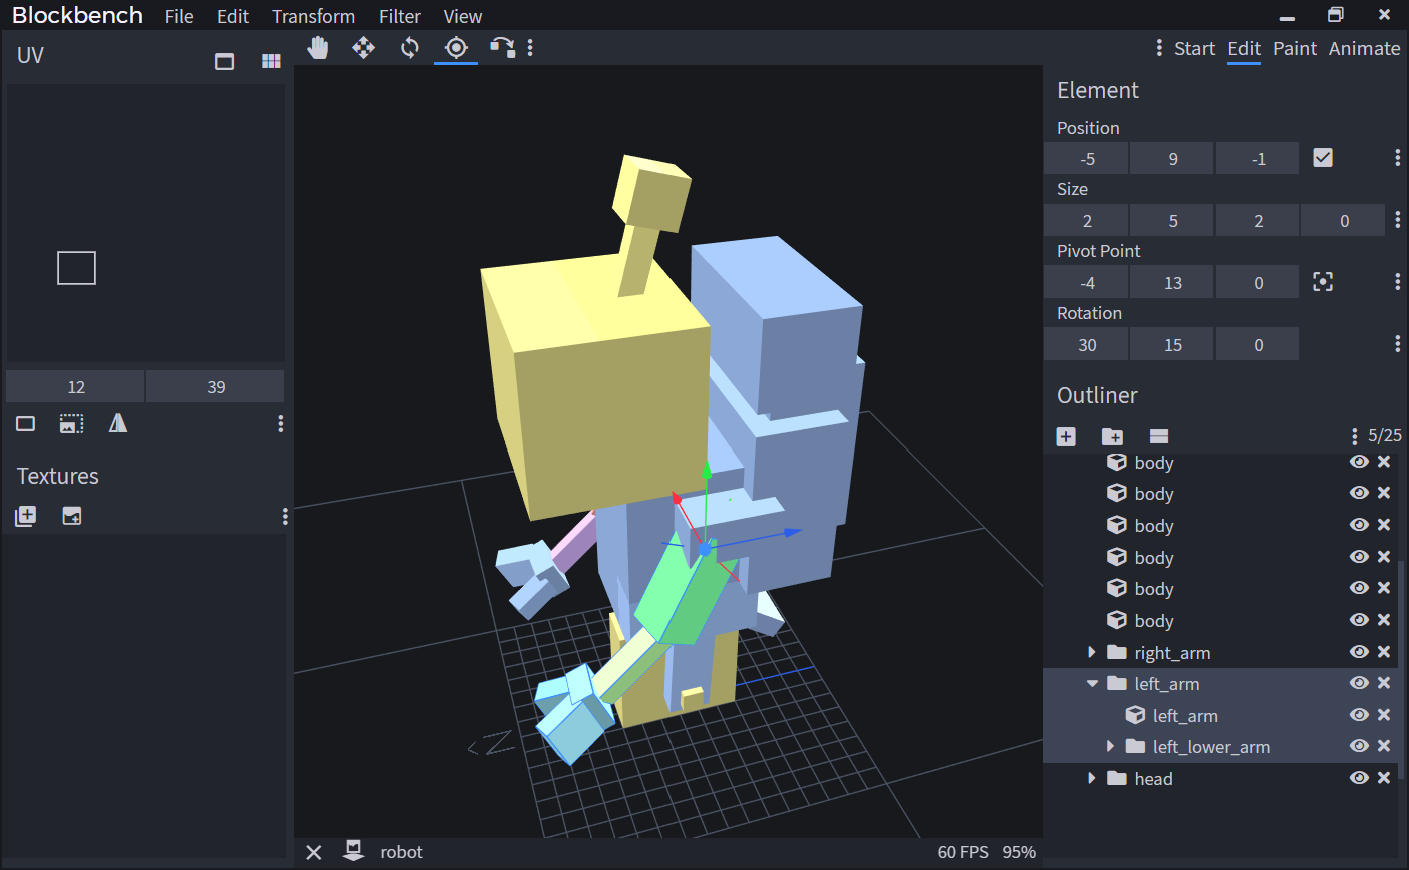 Entity Modeling and Animation | Microsoft Learn